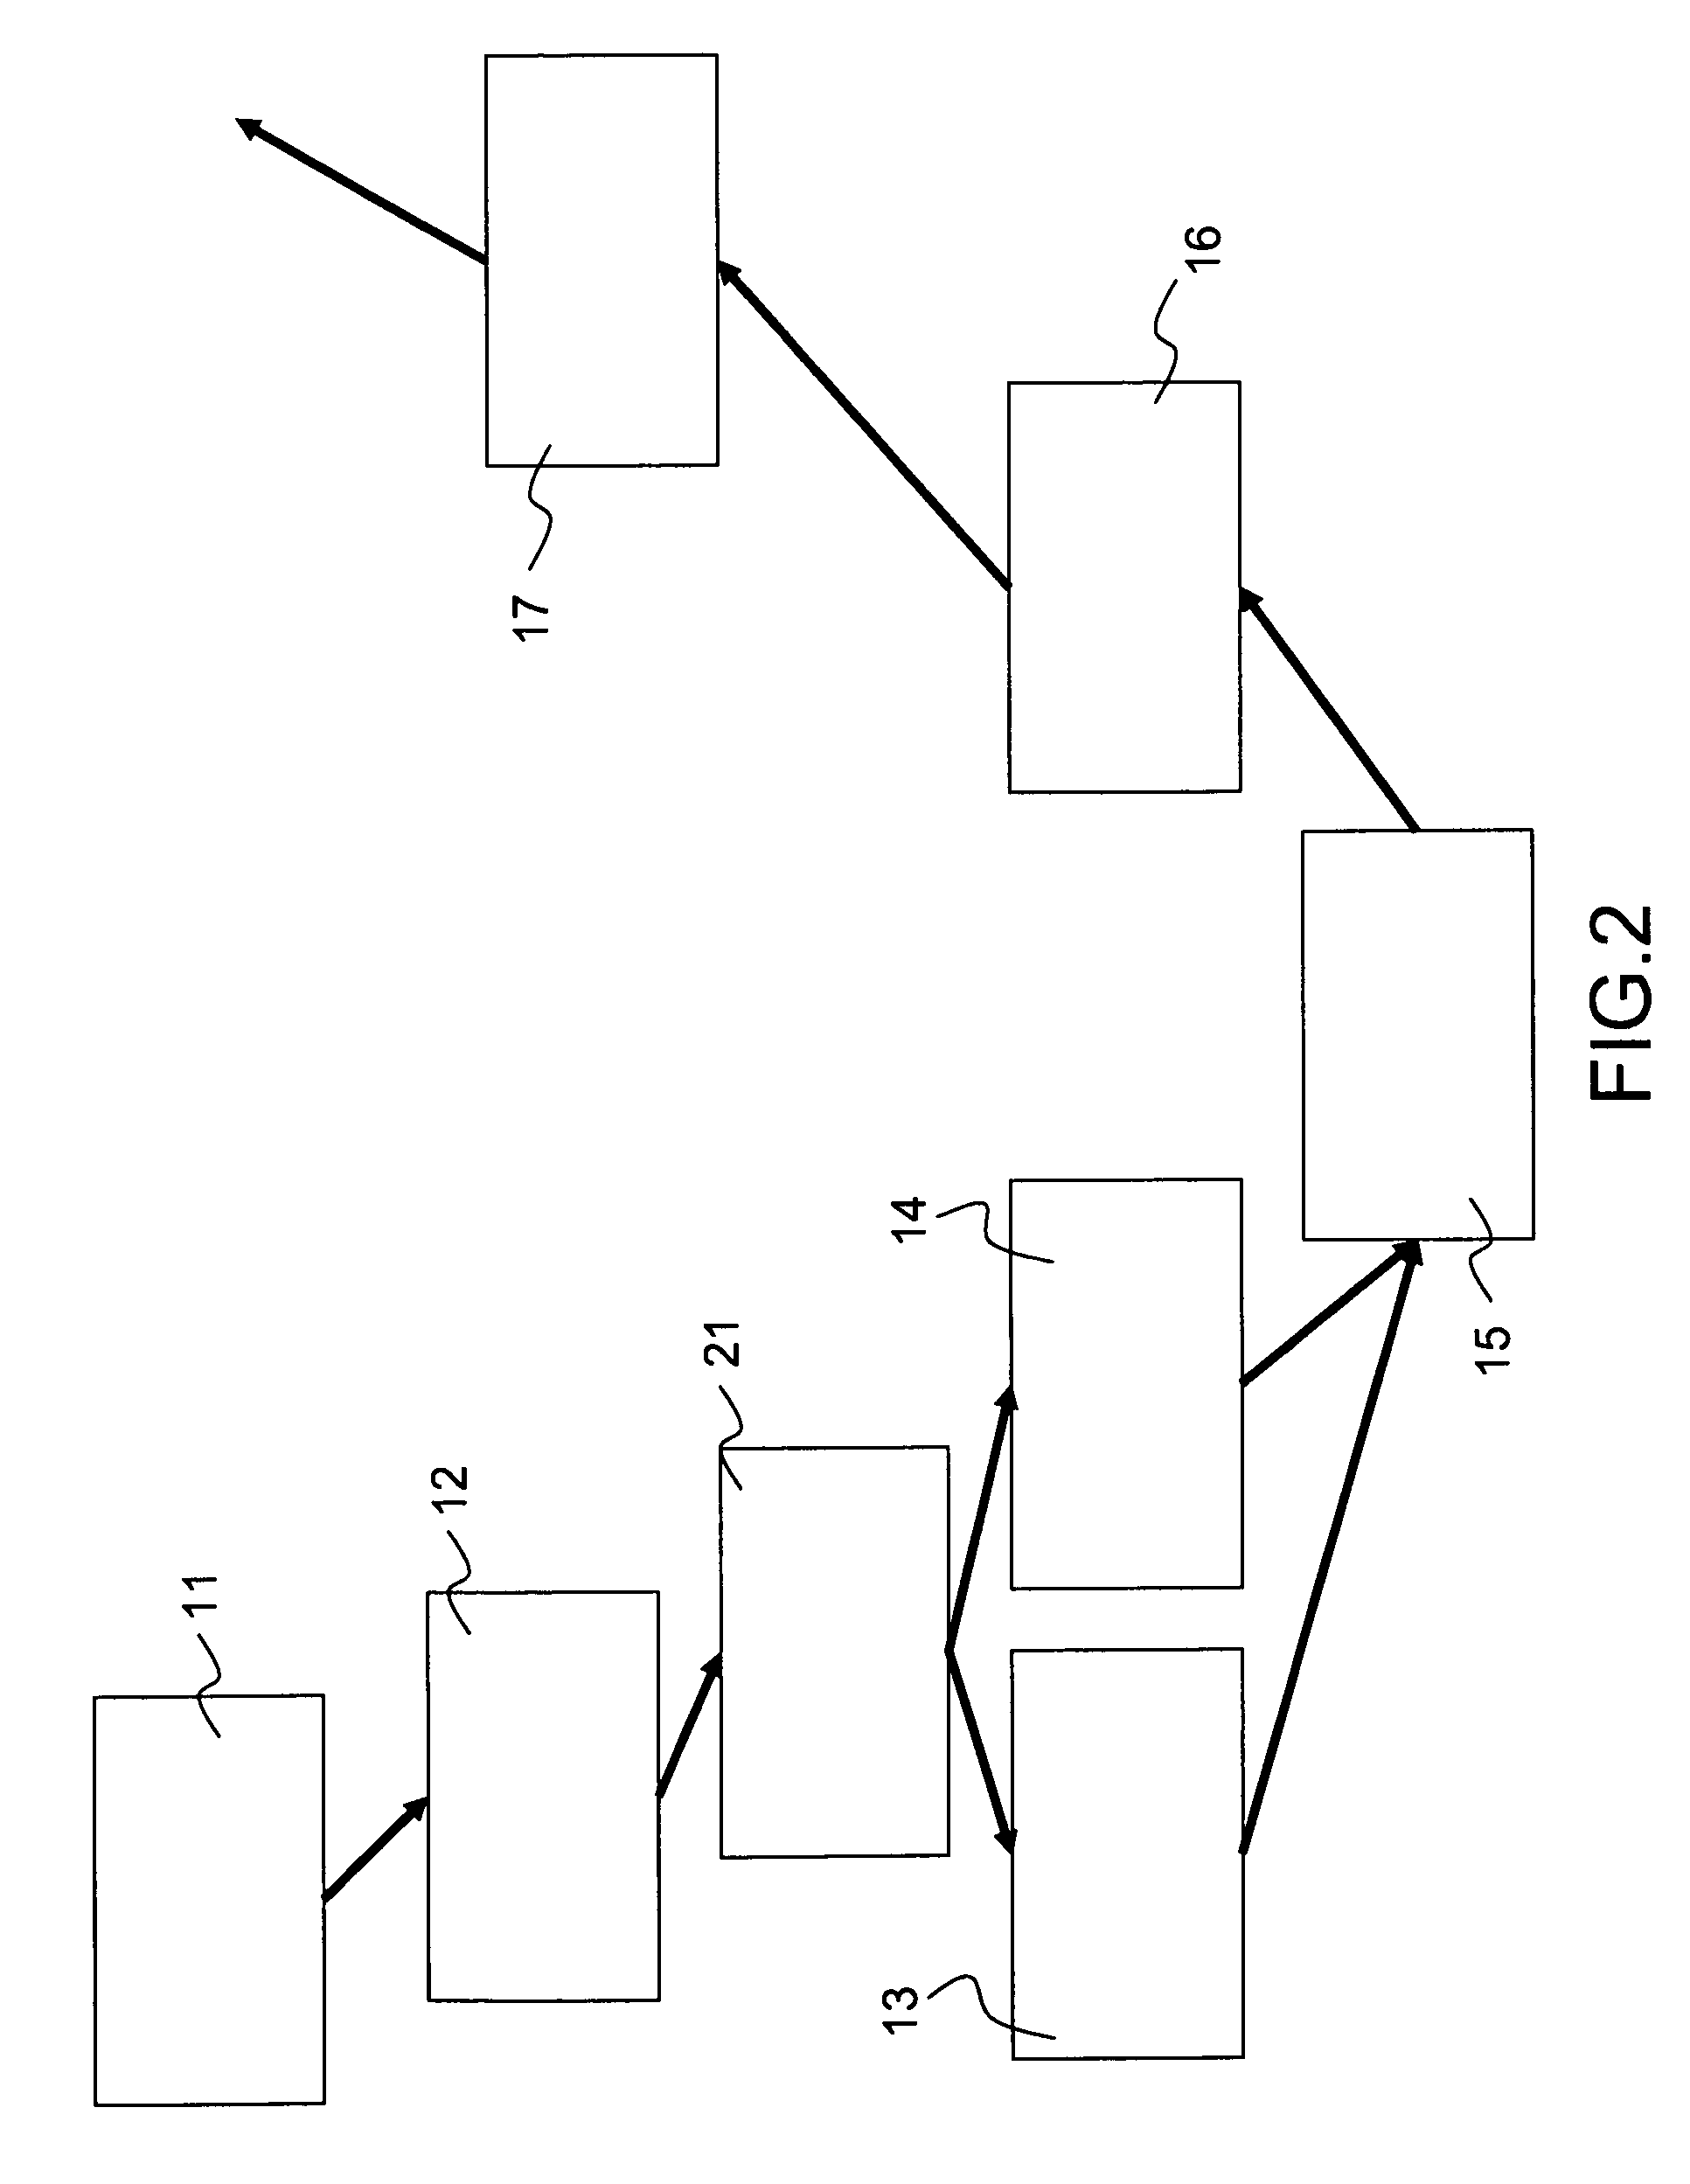 Method of designing a system comprising hardware and software components